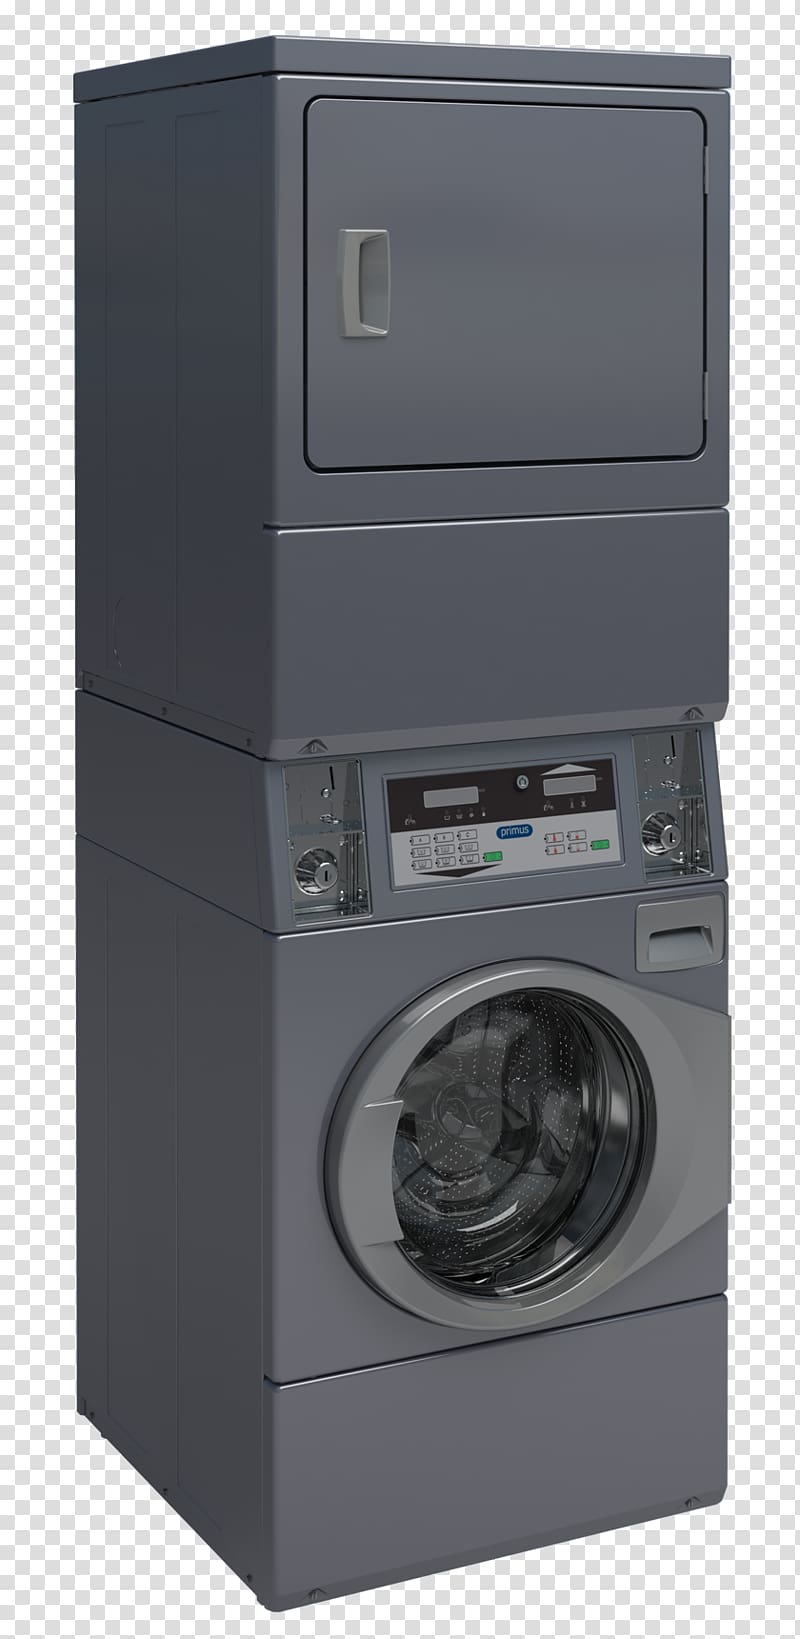 Washing Machines Laundry Clothes dryer Combo washer dryer, industrial washer and dryer transparent background PNG clipart